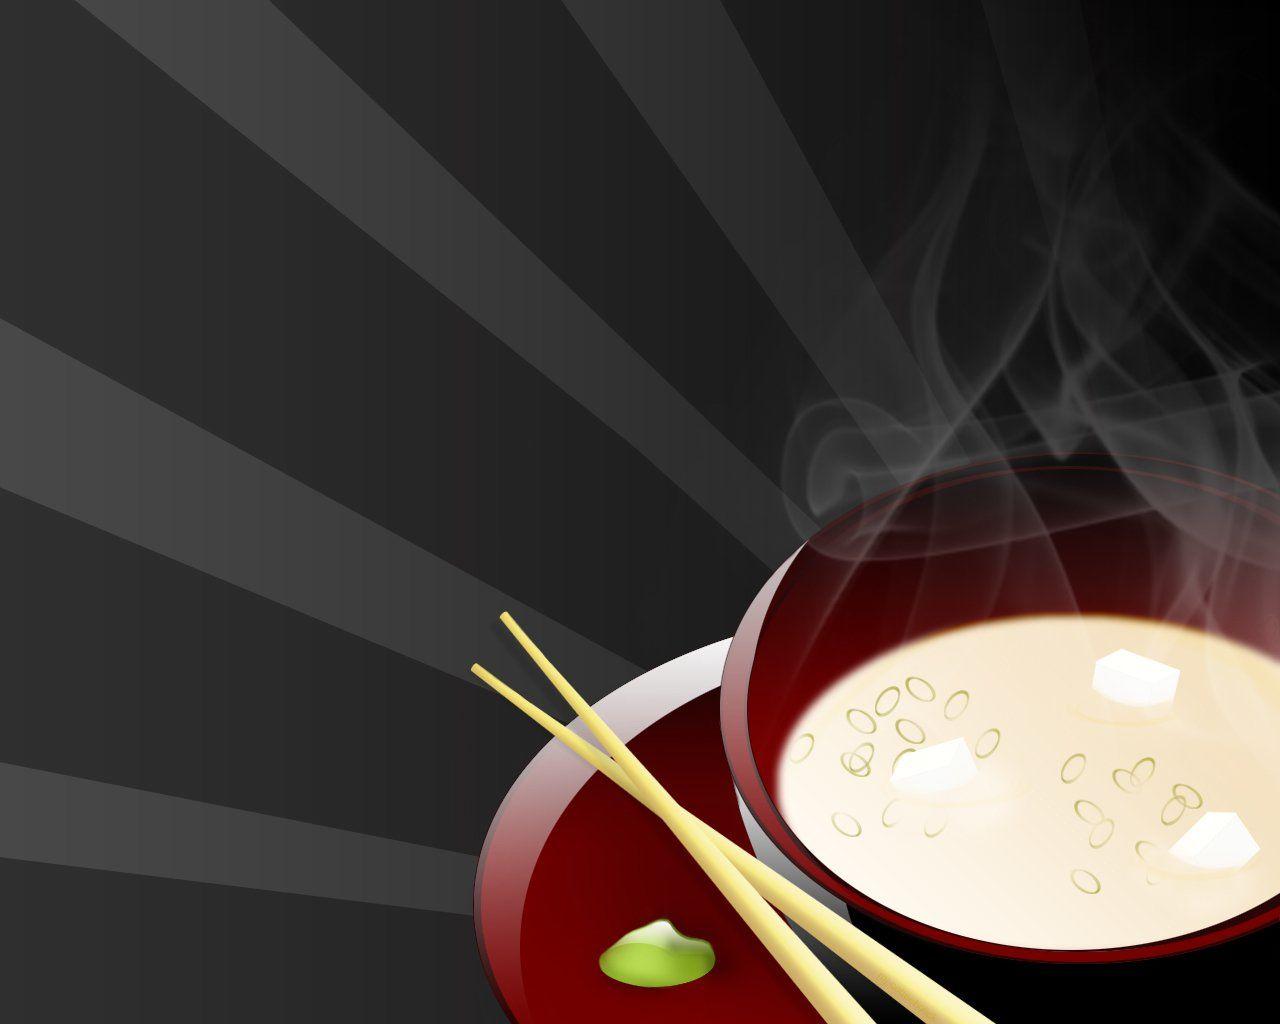 Chinese Food HD Wallpaper and Background Image